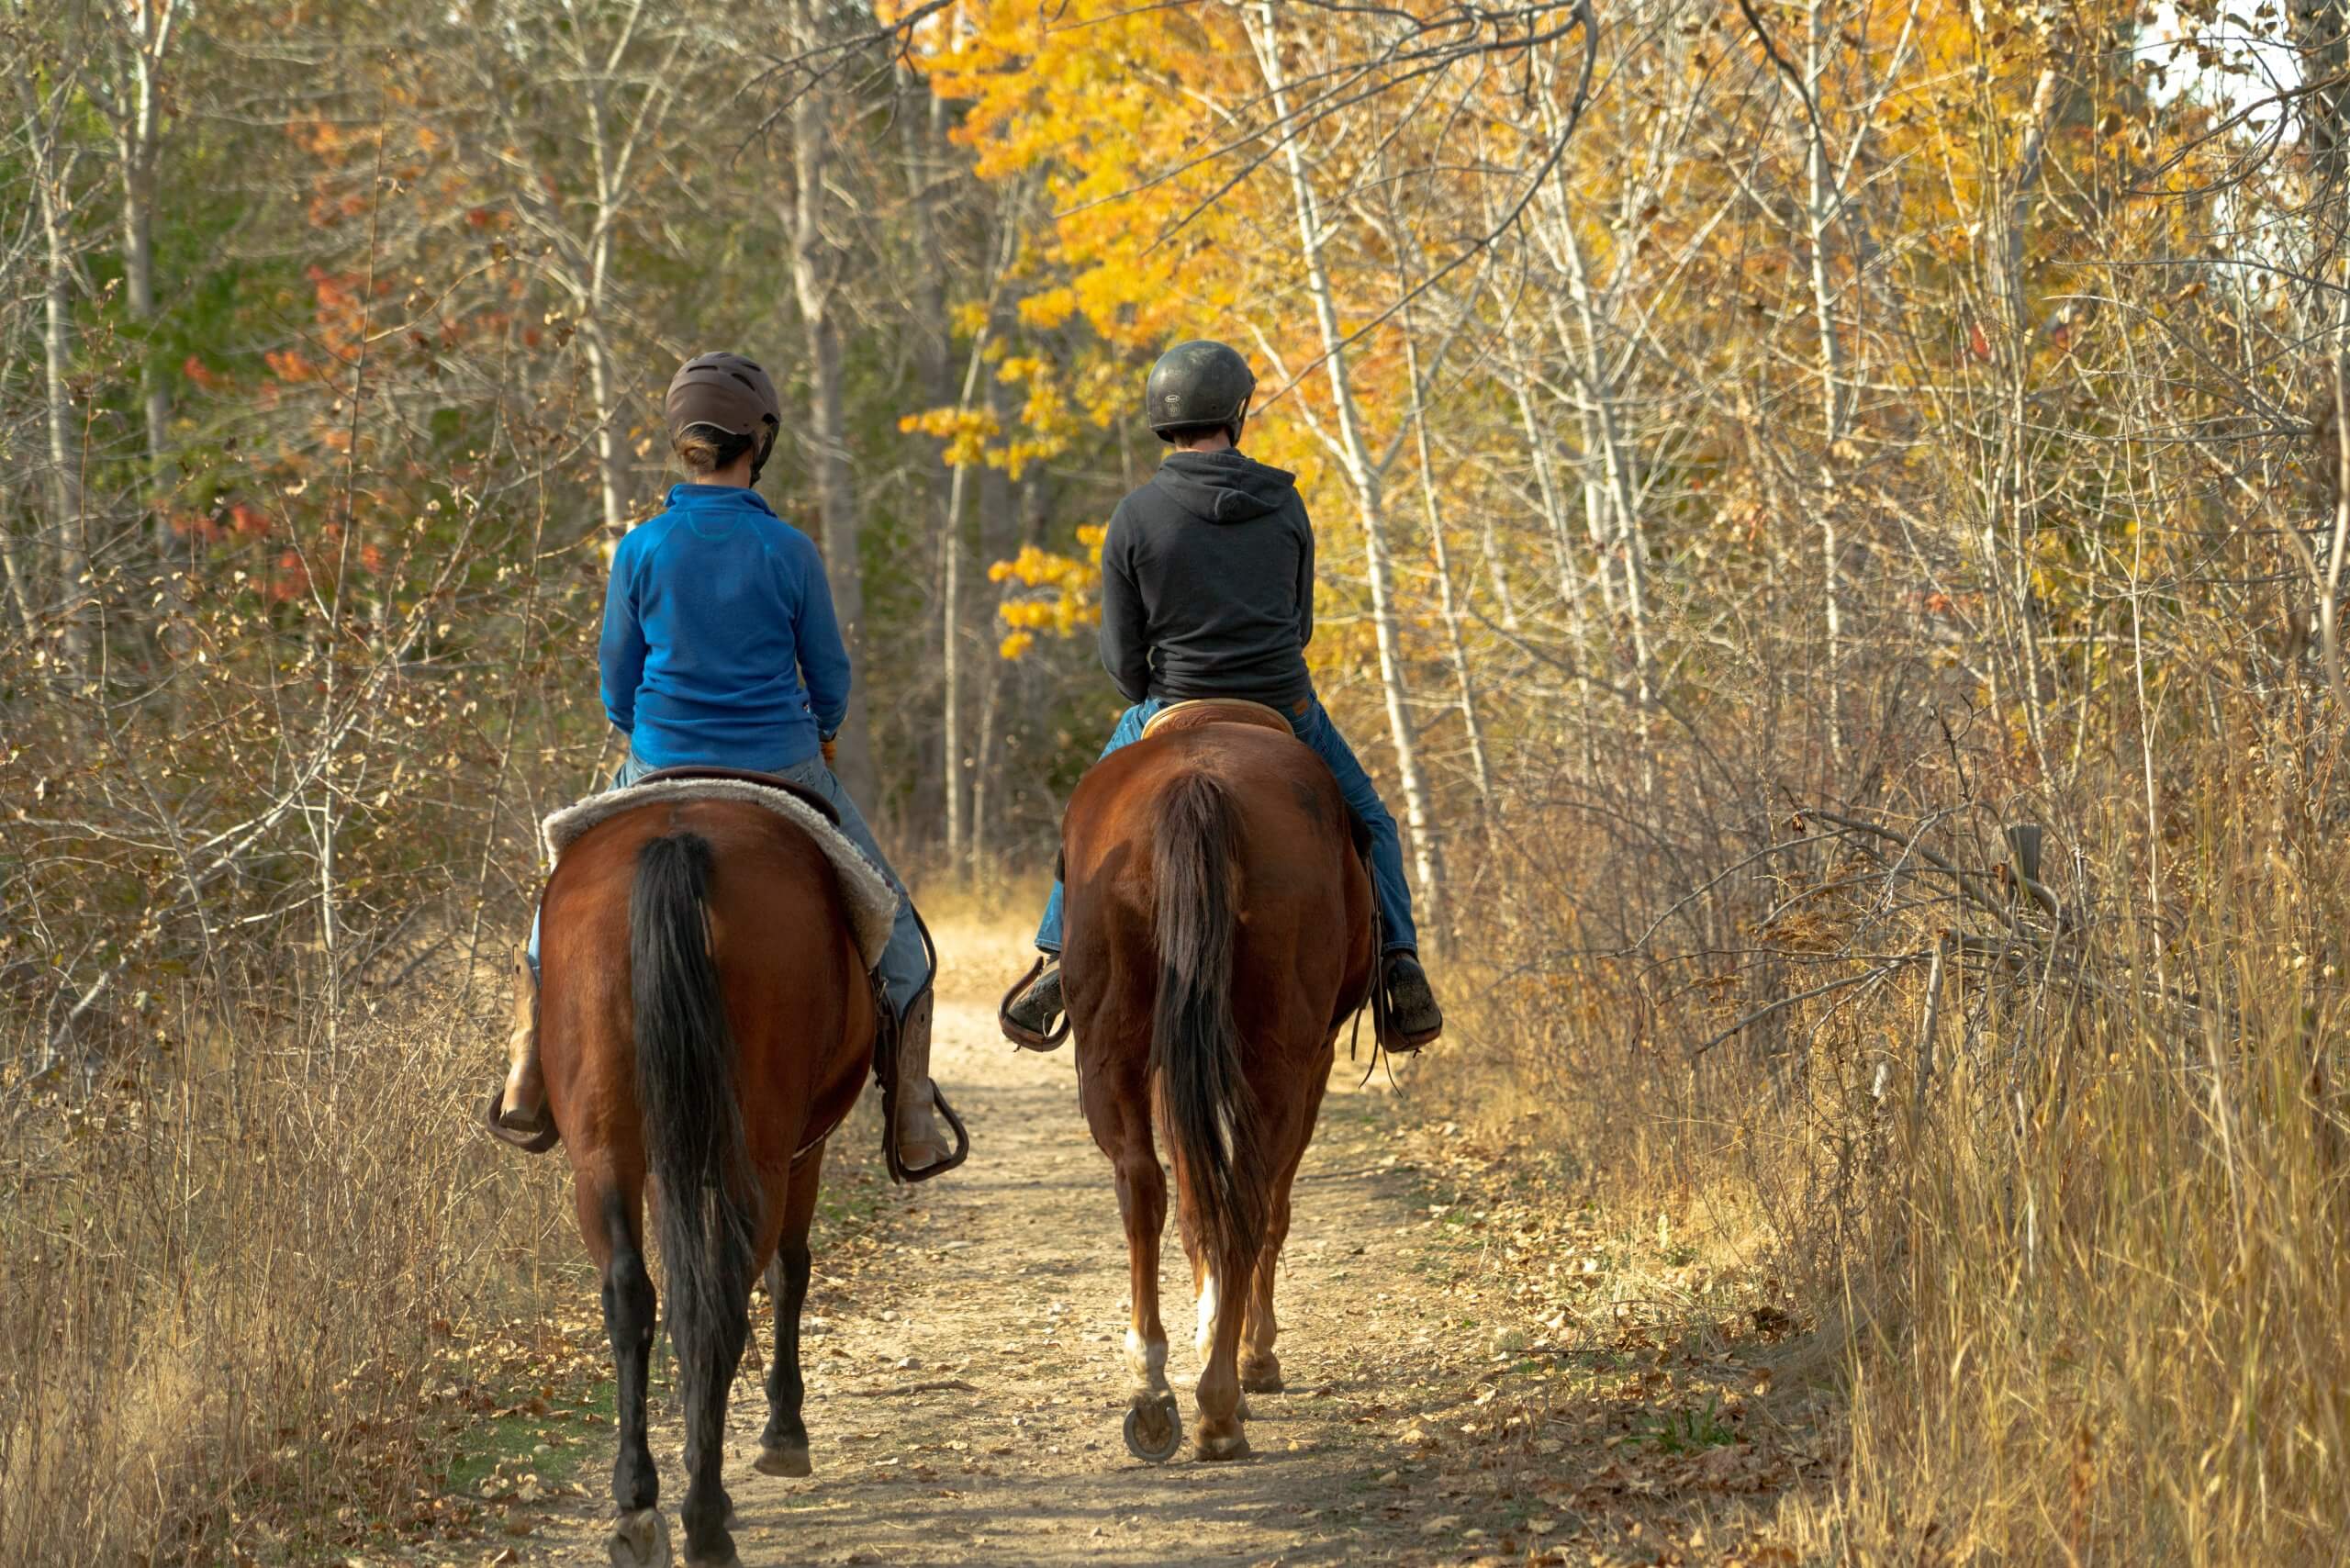 Two people ride horses during the fall season at Eagle Island State Park.